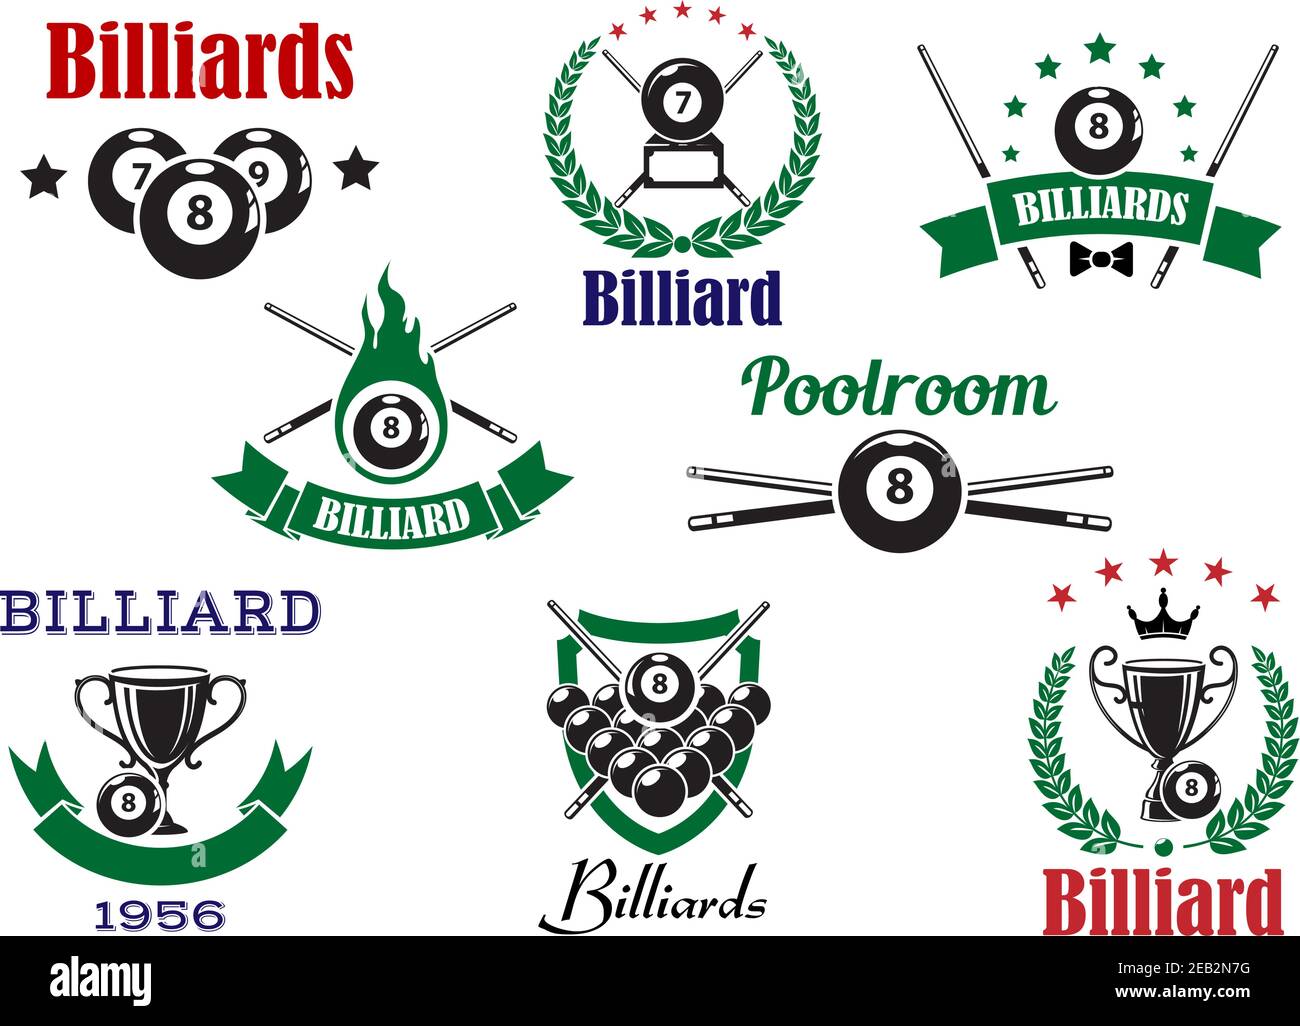 Billiards sports icons with billiard balls, cues and trophy cups, decorated by flame, stars, crown, heraldic shield, laurel wreaths and ribbon banners Stock Vector